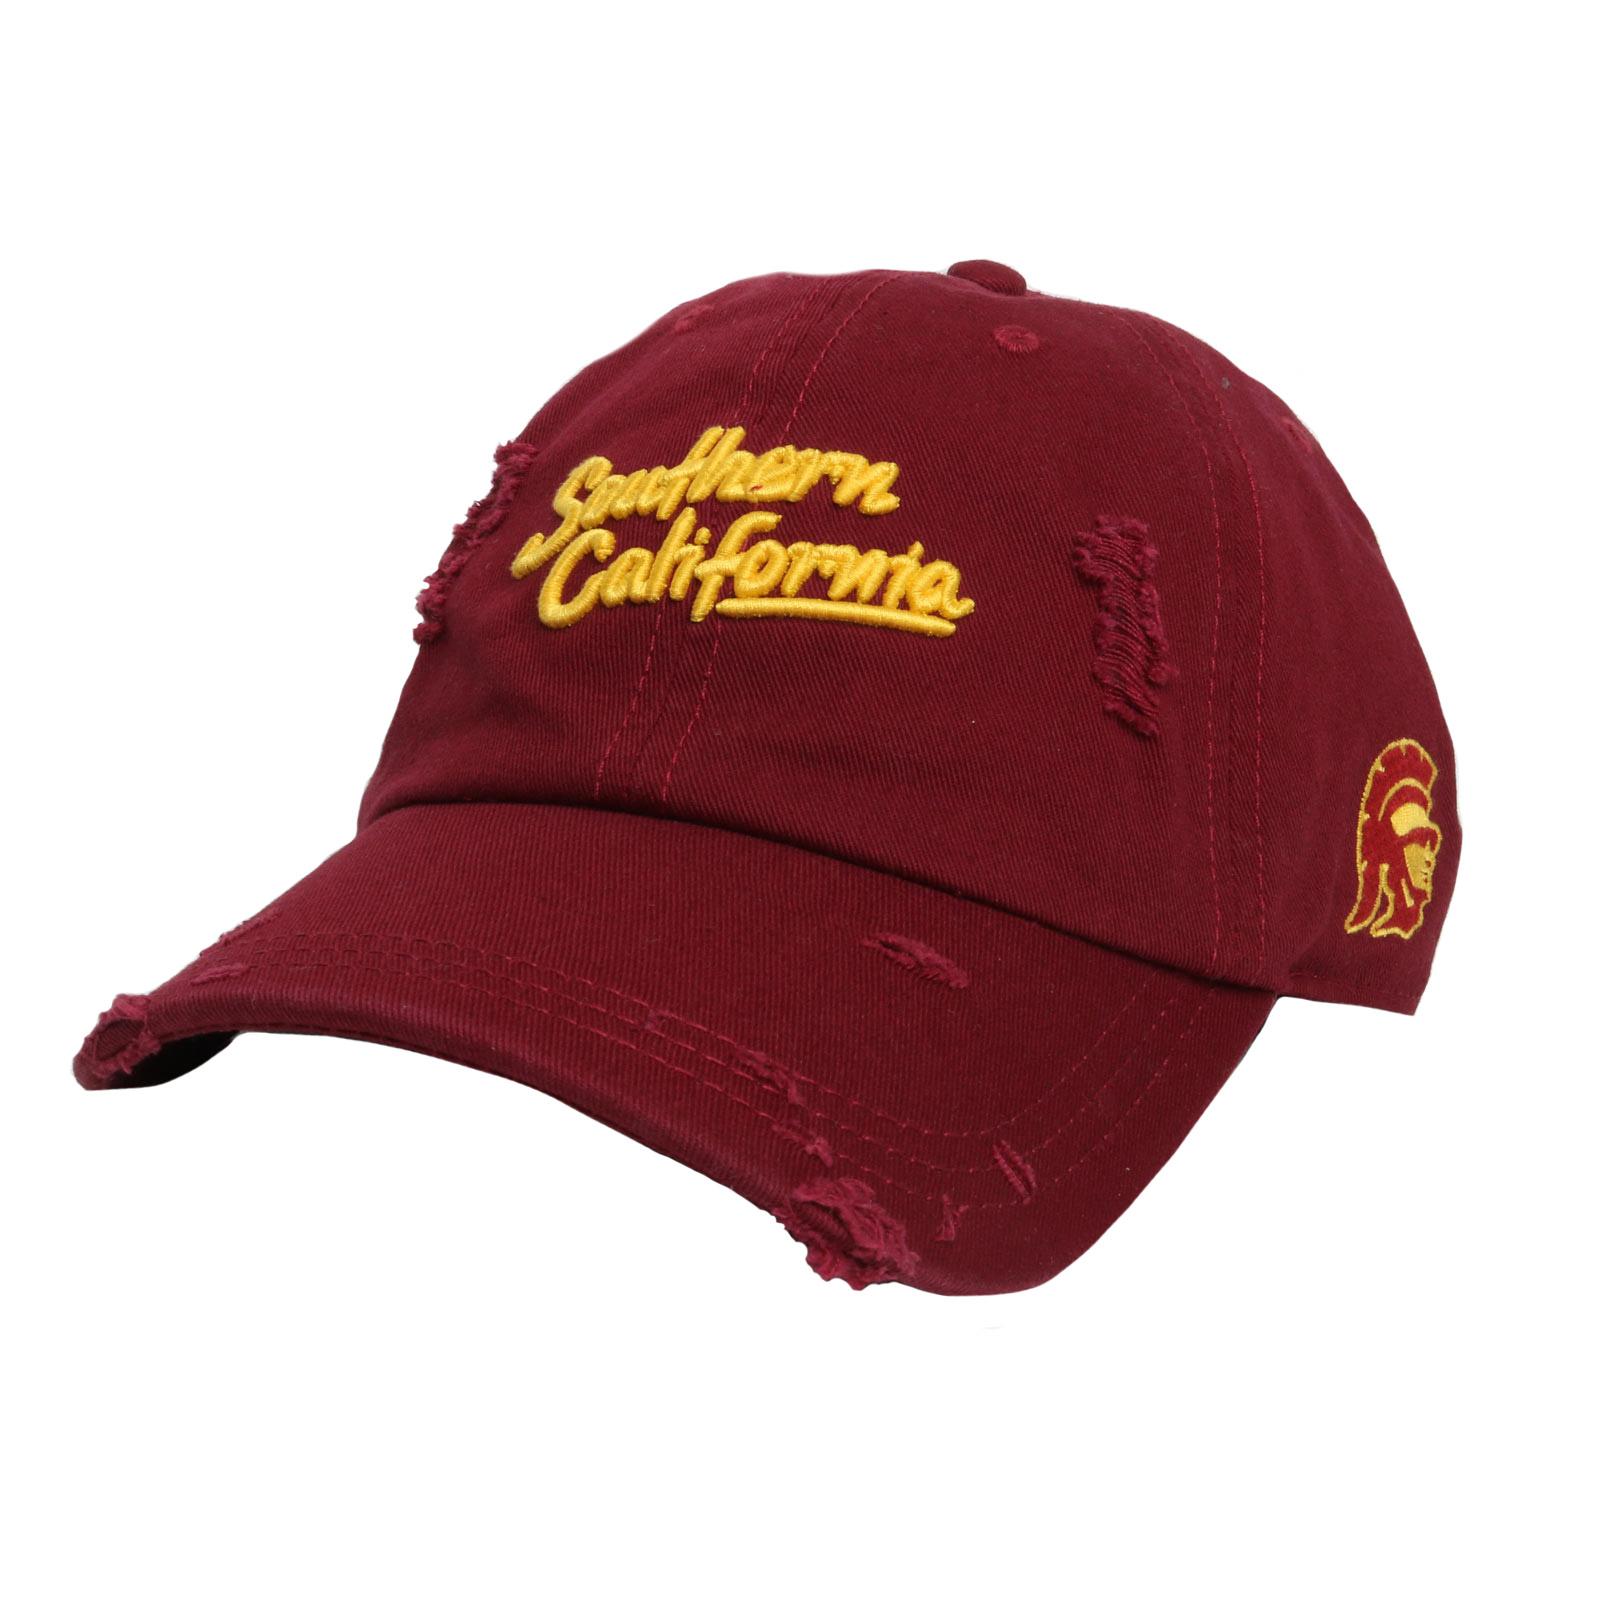 Southern California Tommy Head Distressed Hat FA18 Cardinal image01